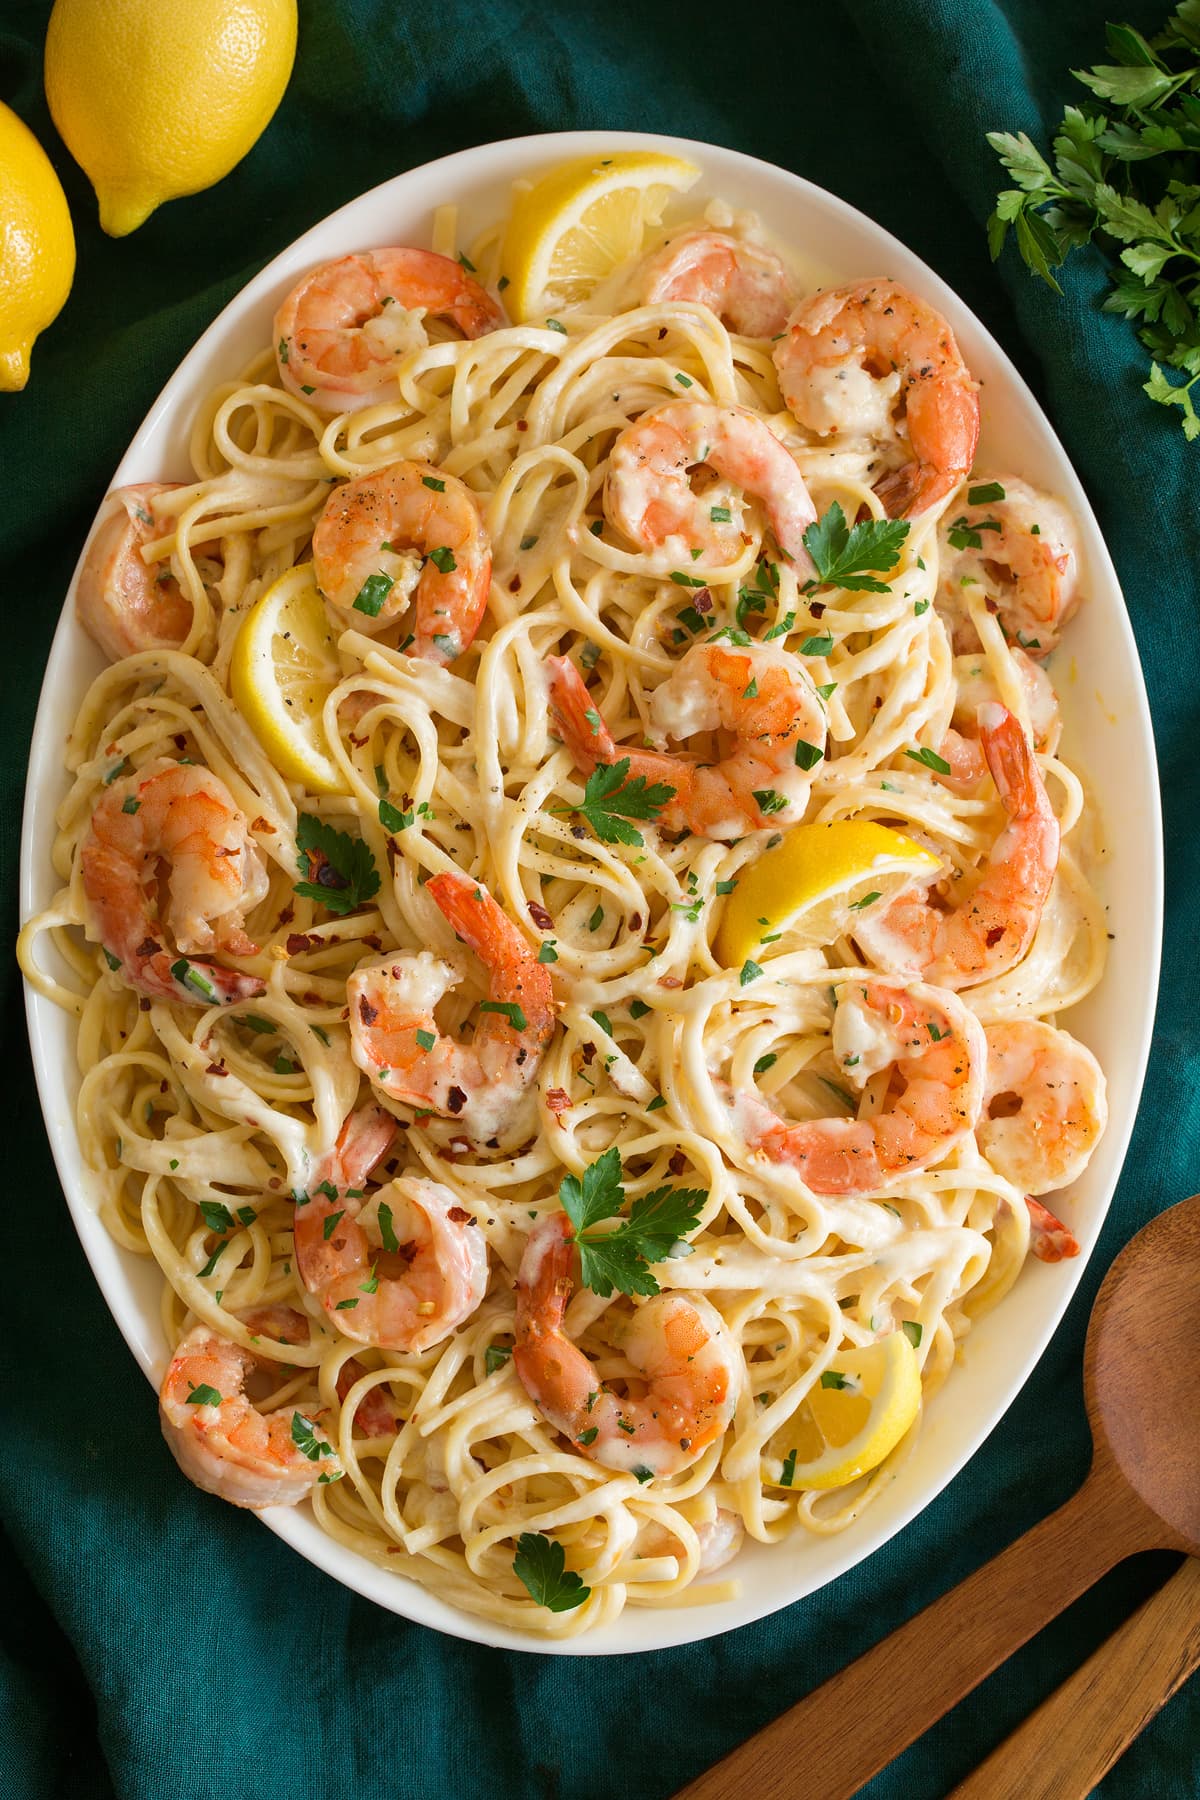 Shrimp pasta with creamy lemon sauce on a white oval serving platter shown from above. Platter is resting on an aqua colored cloth and lemons are shown to the side.